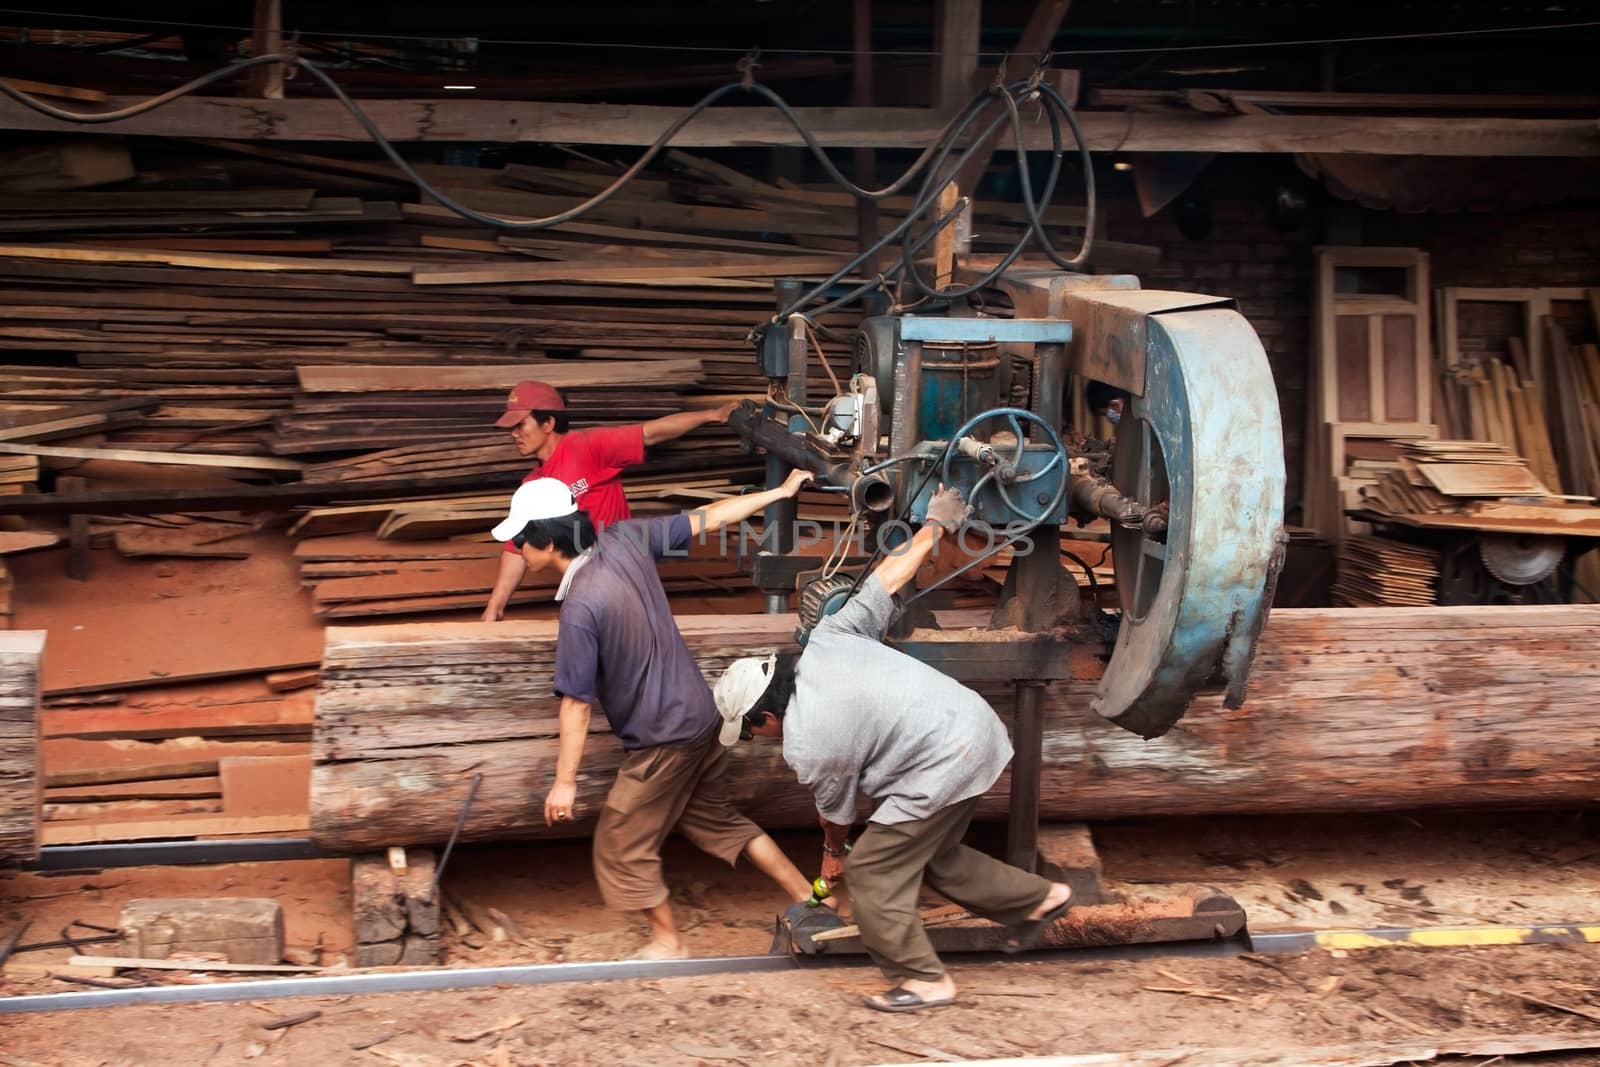 Quy Nhon, Viet Nam: Three woodworker try to pull cumbersome machine to split section of a tree trunk into plank at sawmill. Vietnam, June 18, 2012